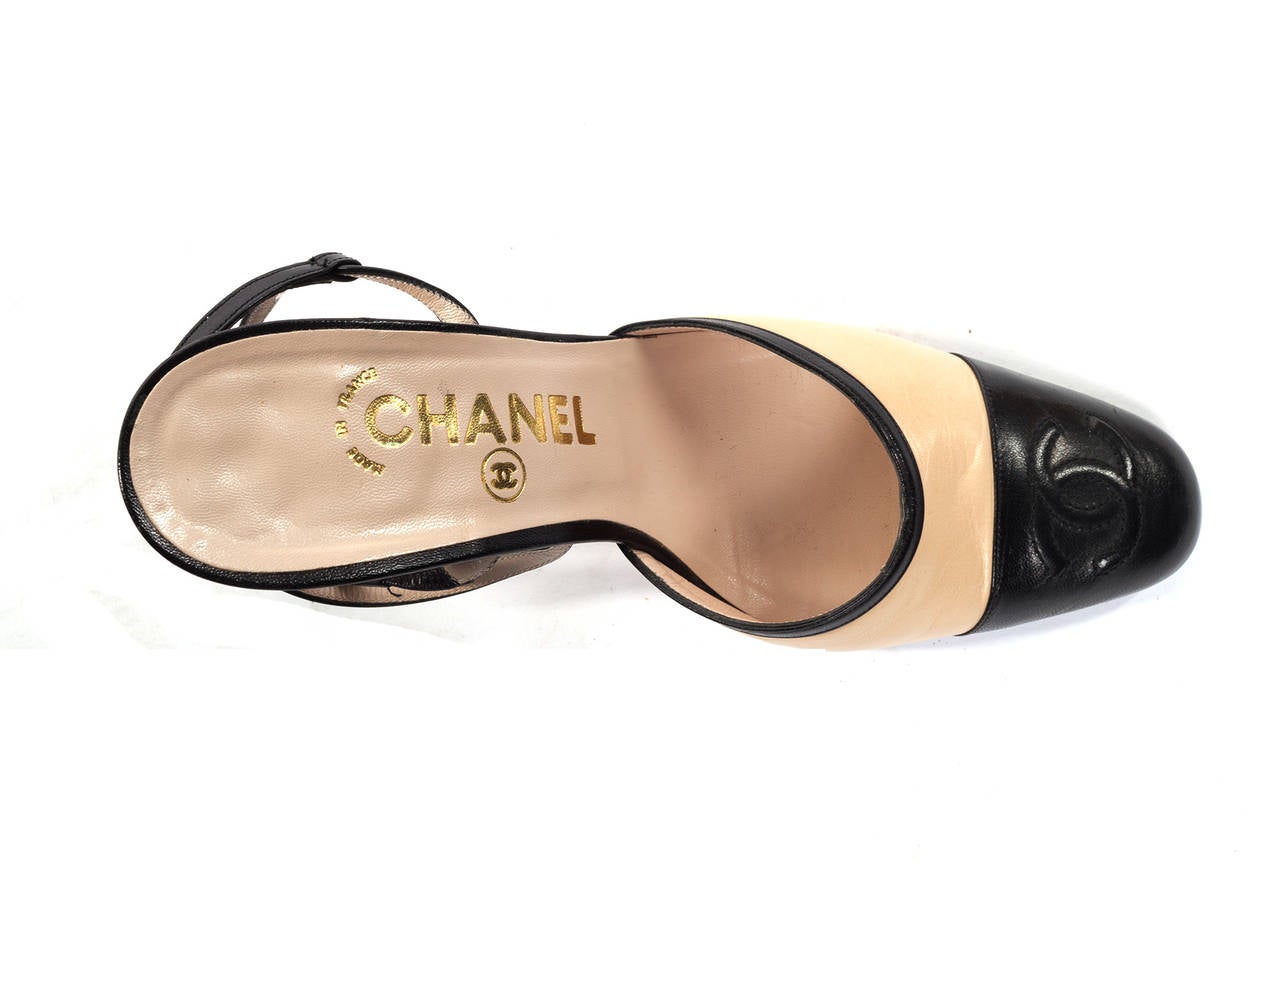 Classic Chanel Pumps in 2-tone iconic Chanel colors and logo, Sz. 38 3